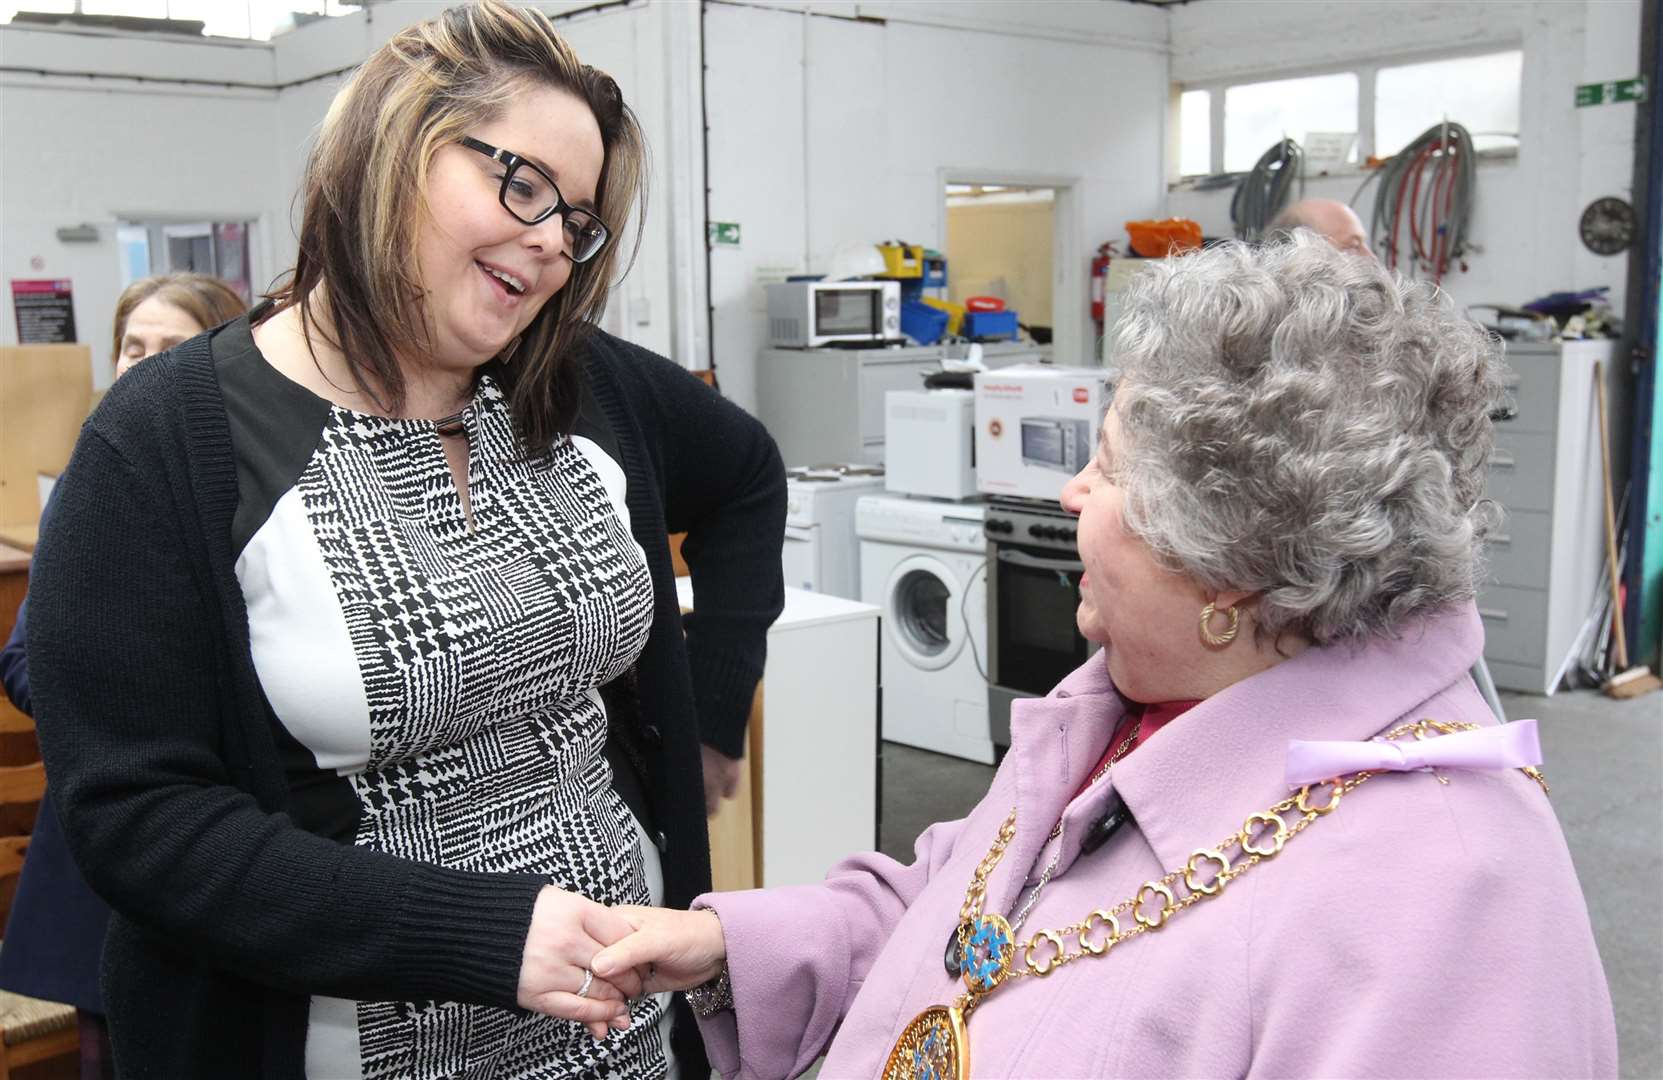 Evelyn Saunders, manager of The Neighbourhood Furniture Store, meets the then Mayor of Swale, Cllr Anita Walker, in 2016 Picture: John Westhrop